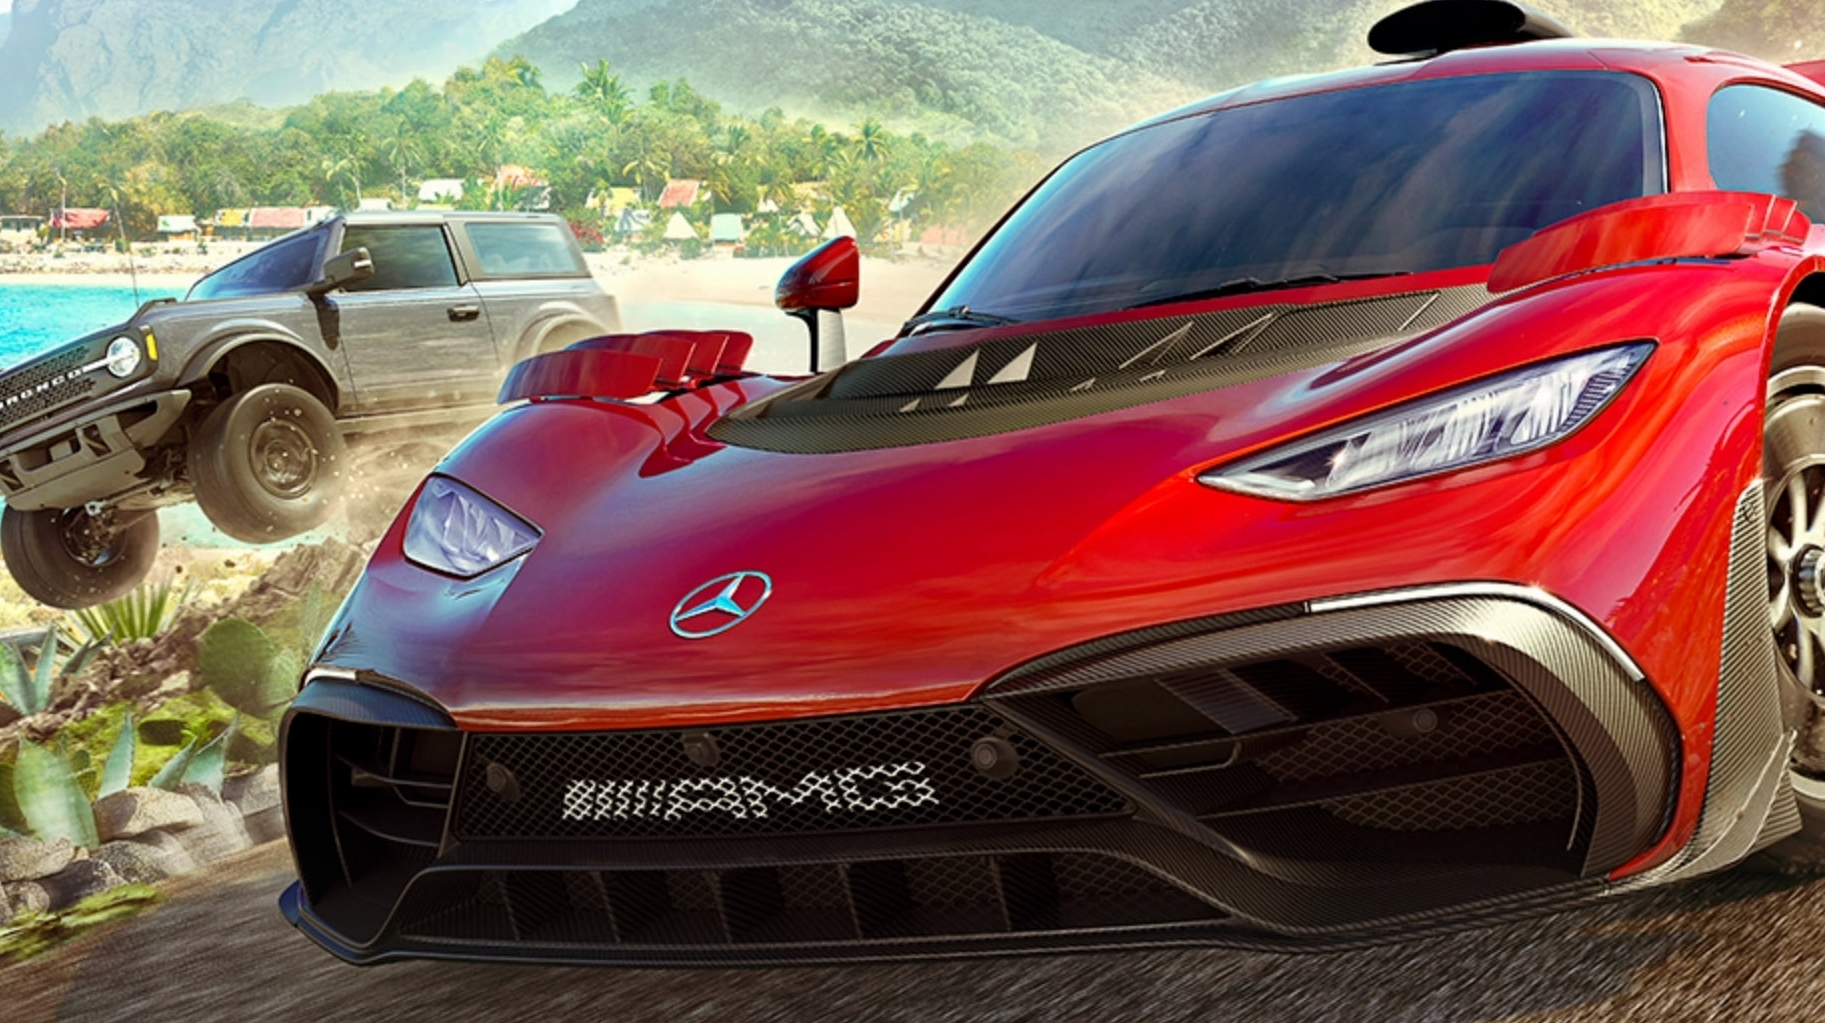 cheat codes for forza horizon for xbox one